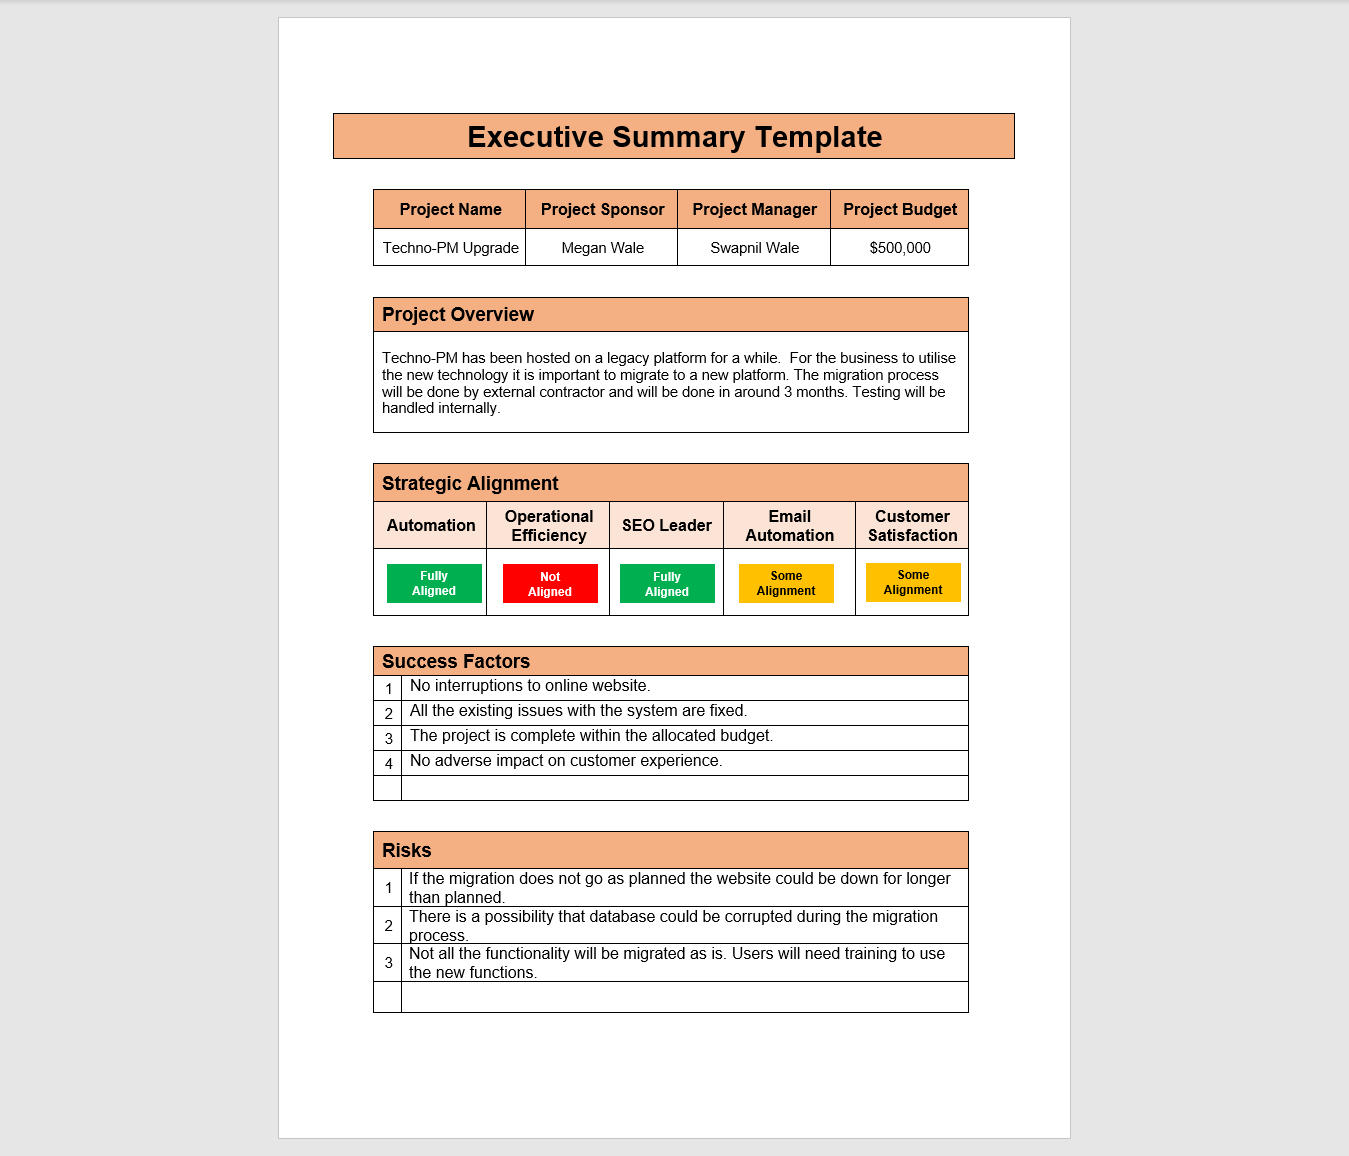 How to Write an Executive Summary  Download Word and PowerPoint